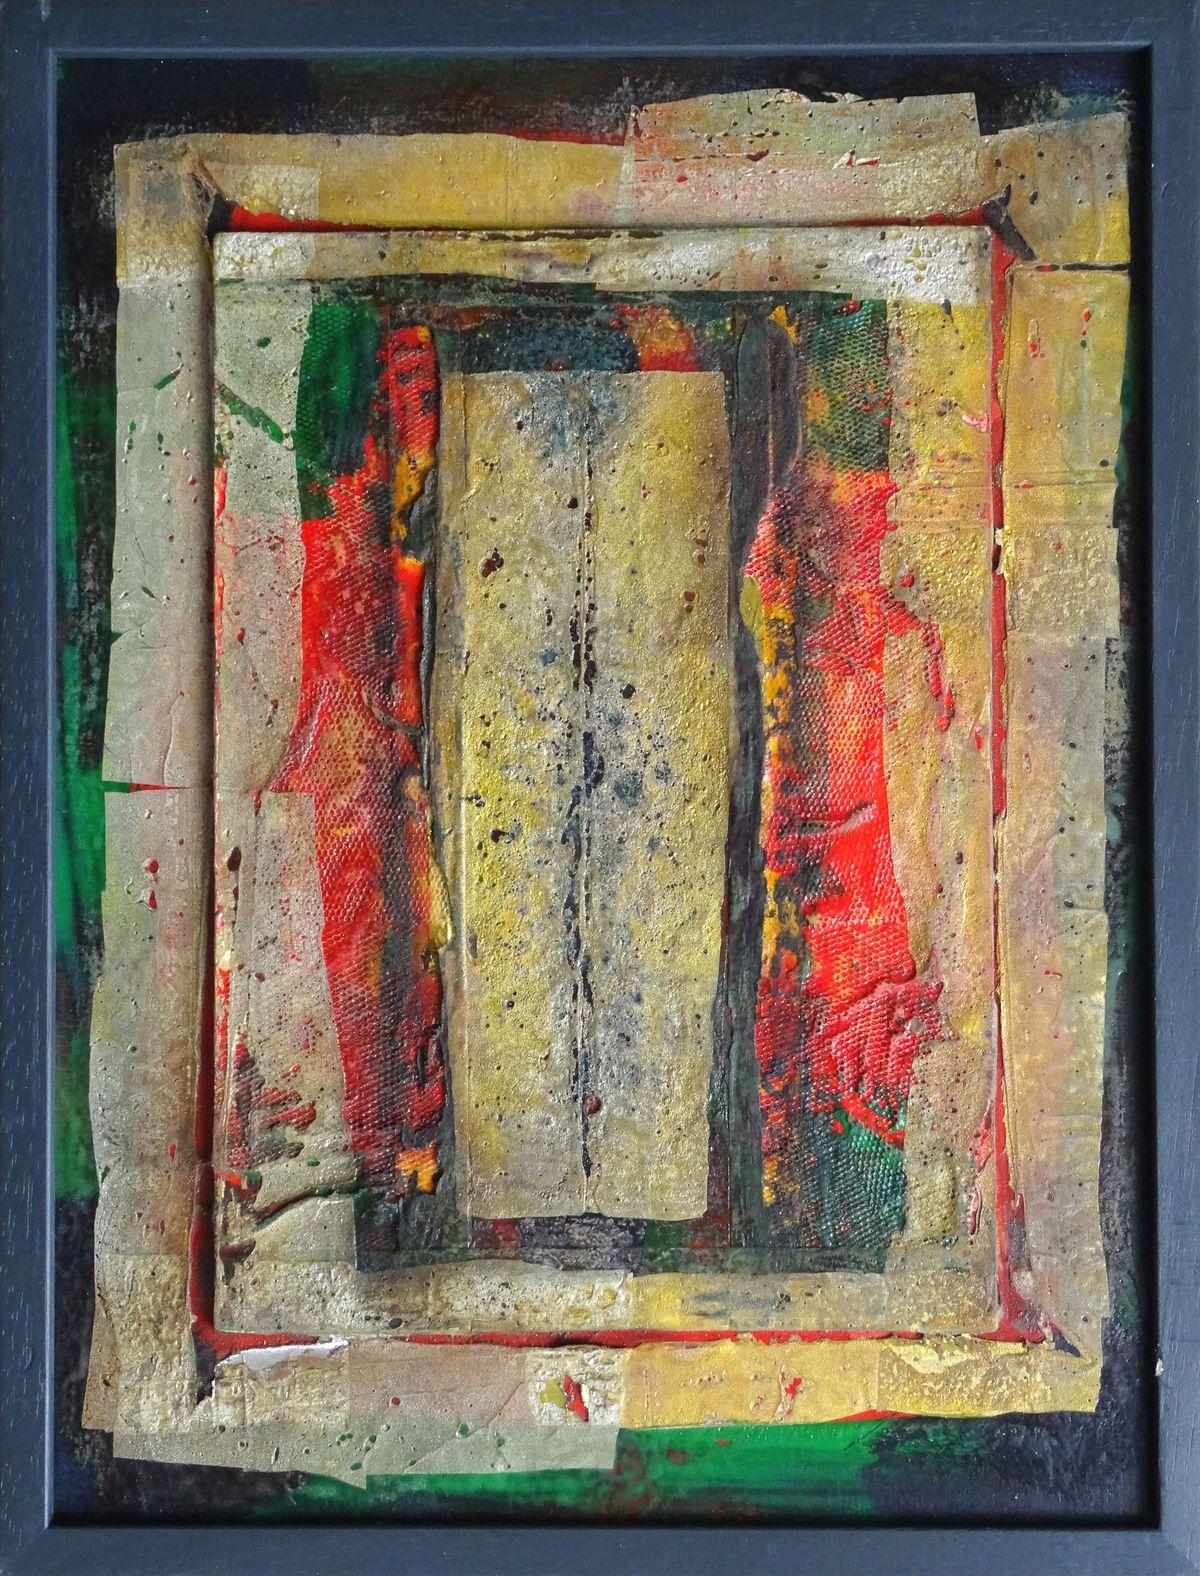 Pharaoh's treasures. 2020. Wood, author's technique, assembly, 40x30 cm - Assemblage Painting by Atis Ievins